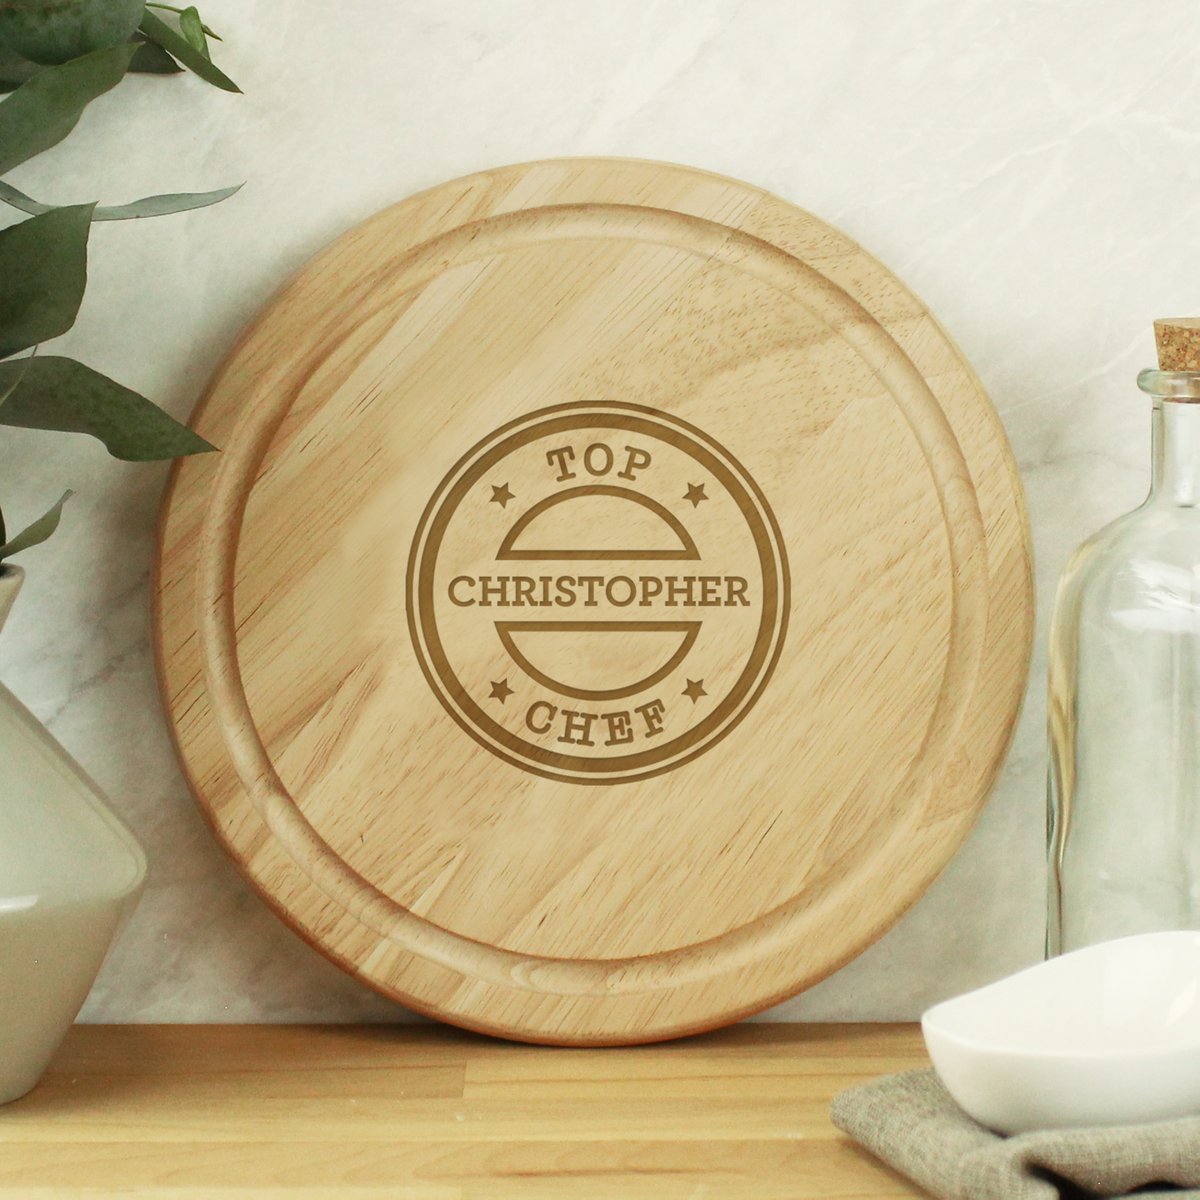 NEW!
This personalised chopping board is a great gift idea for any 'Top Chef' you might know lilybluestore.com/products/perso…

#cooks #cooking #kitchen #giftideas #shopindie #MHHSBD